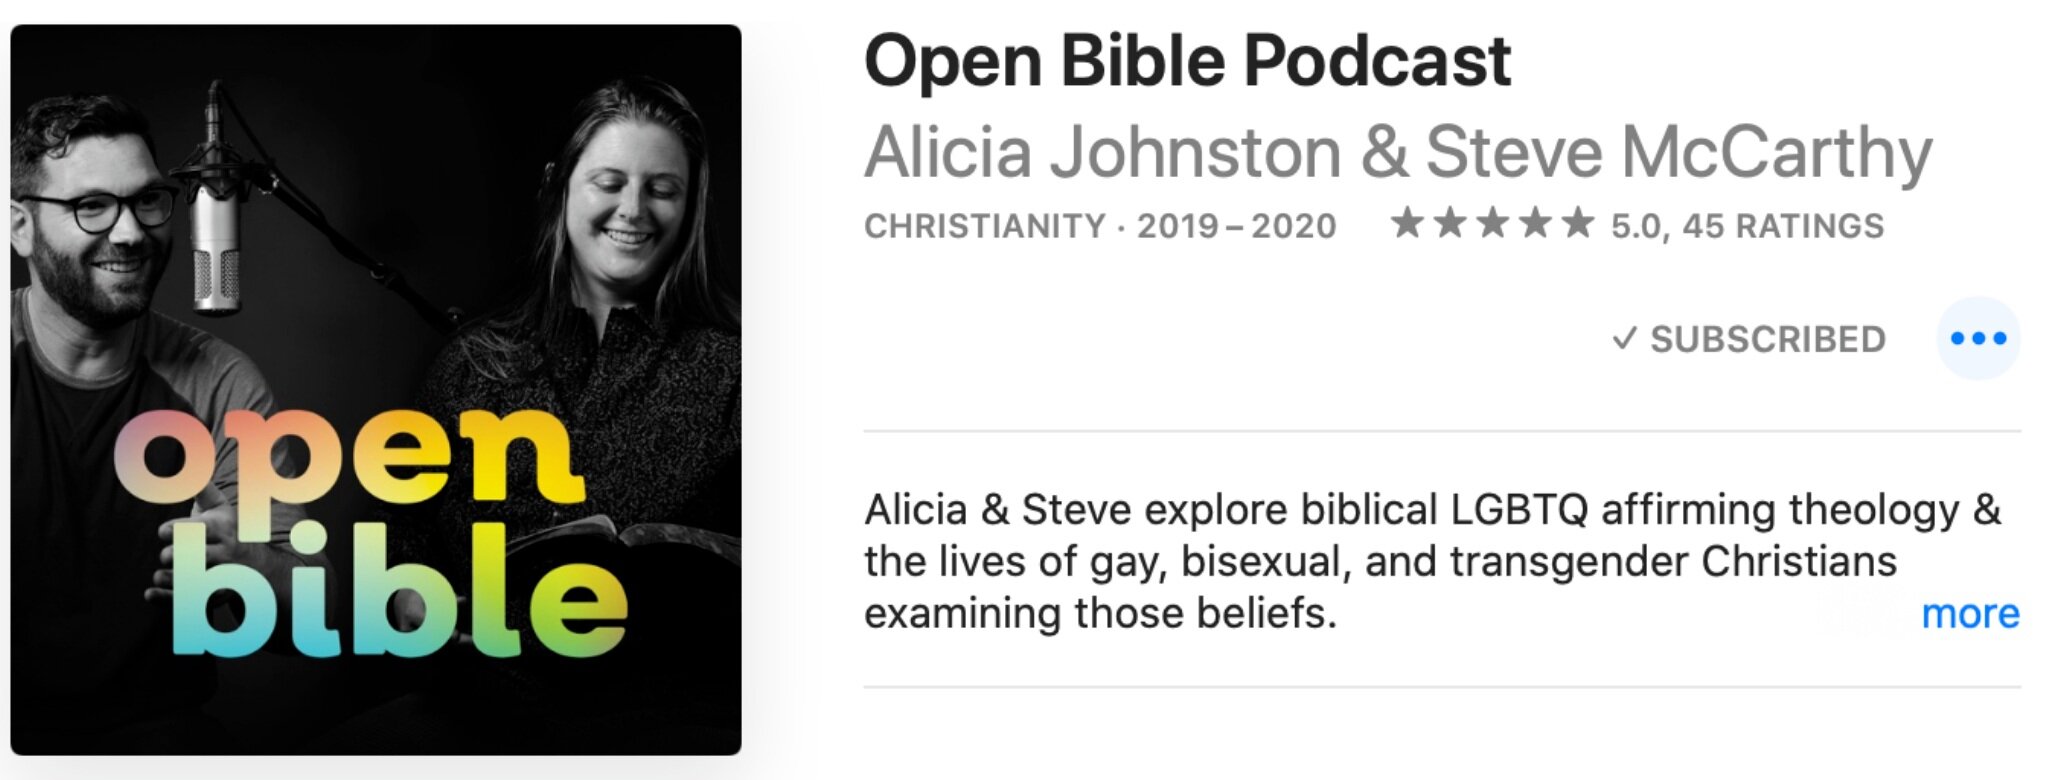 Check out the Open Bible Podcast with Alicia Johnston &amp; Steve McCarthy